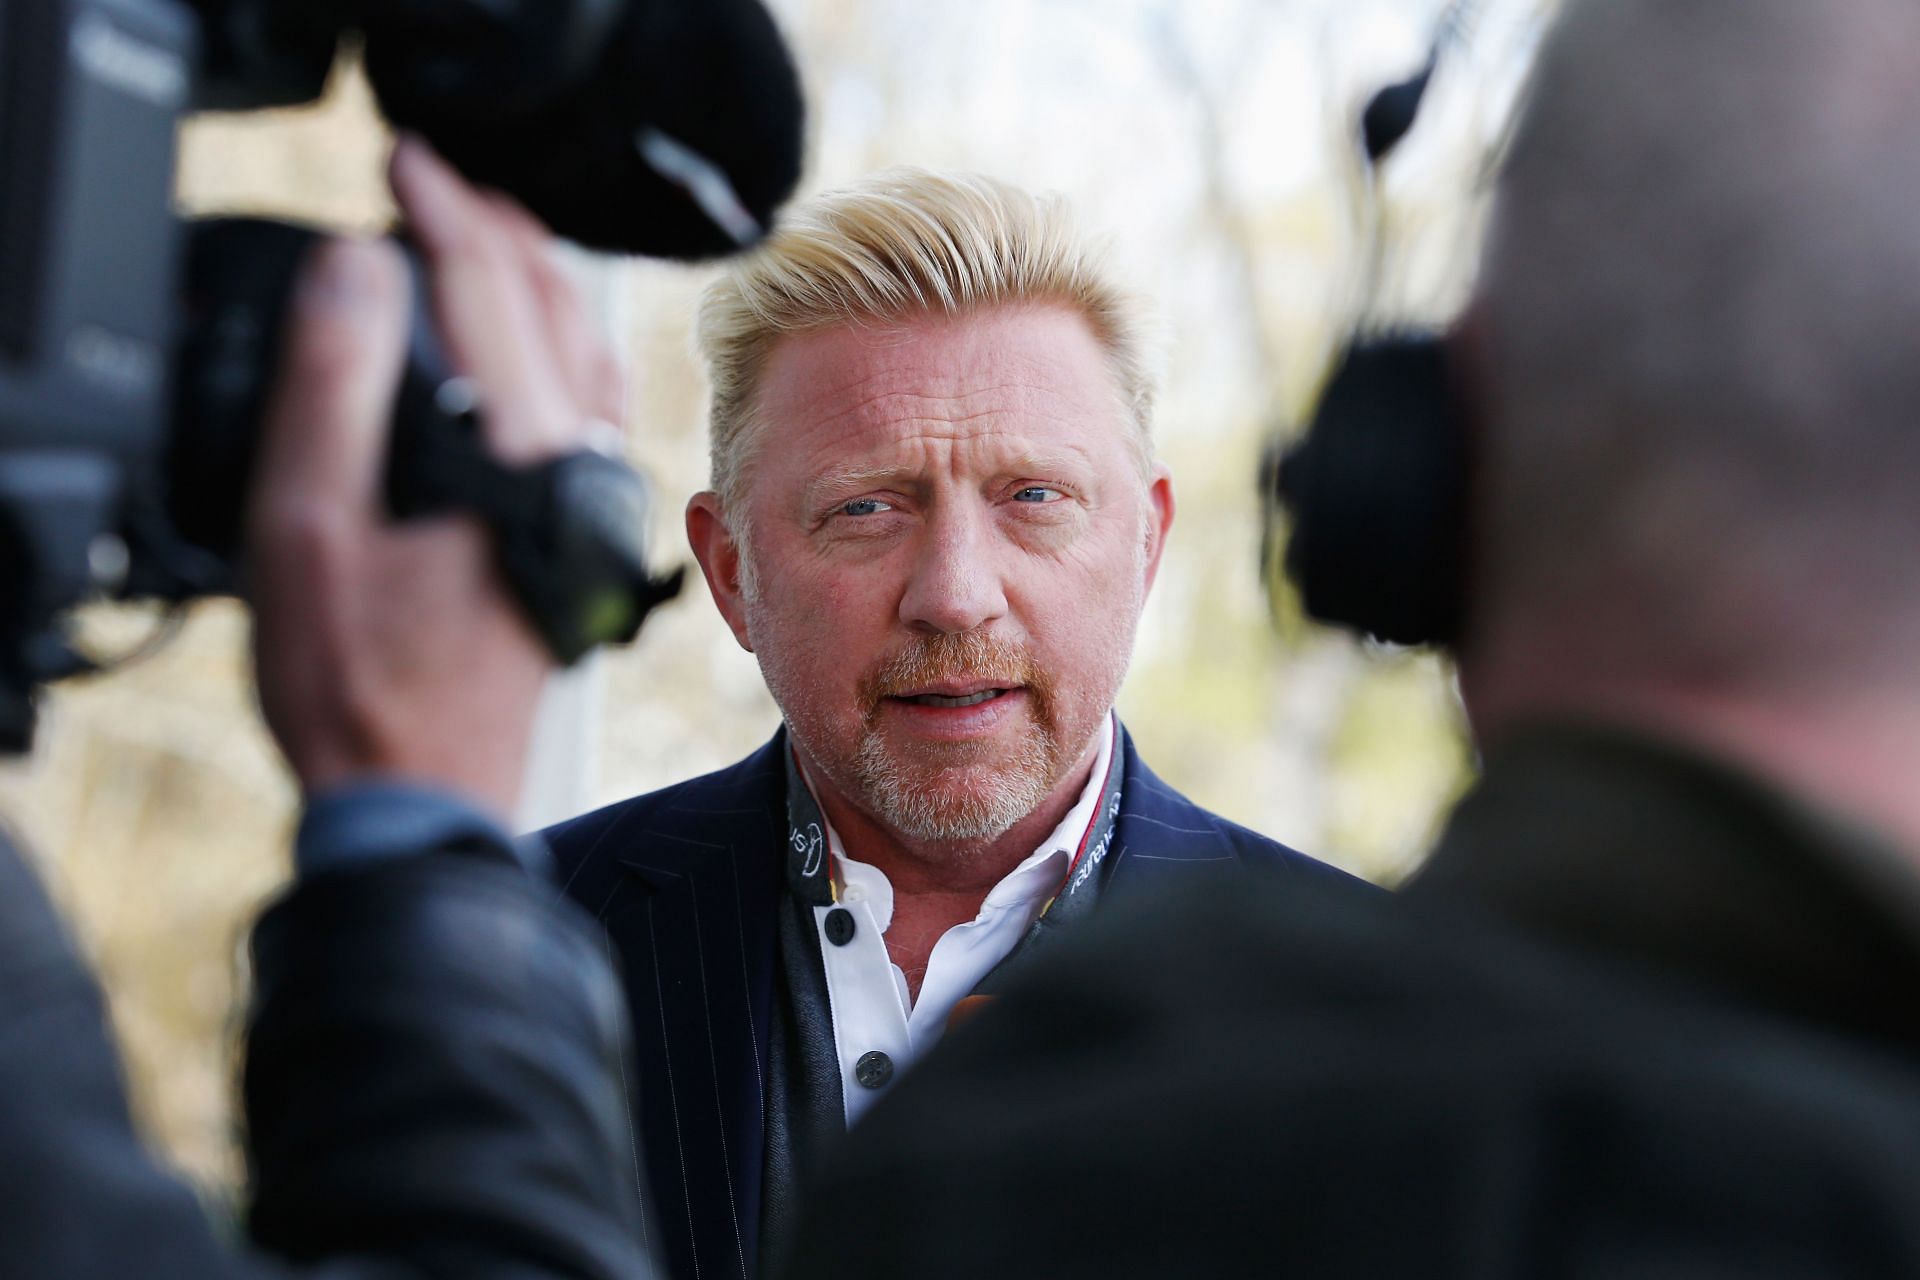 Boris Becker could have escaped the sentence if he had cooperated with the authorities